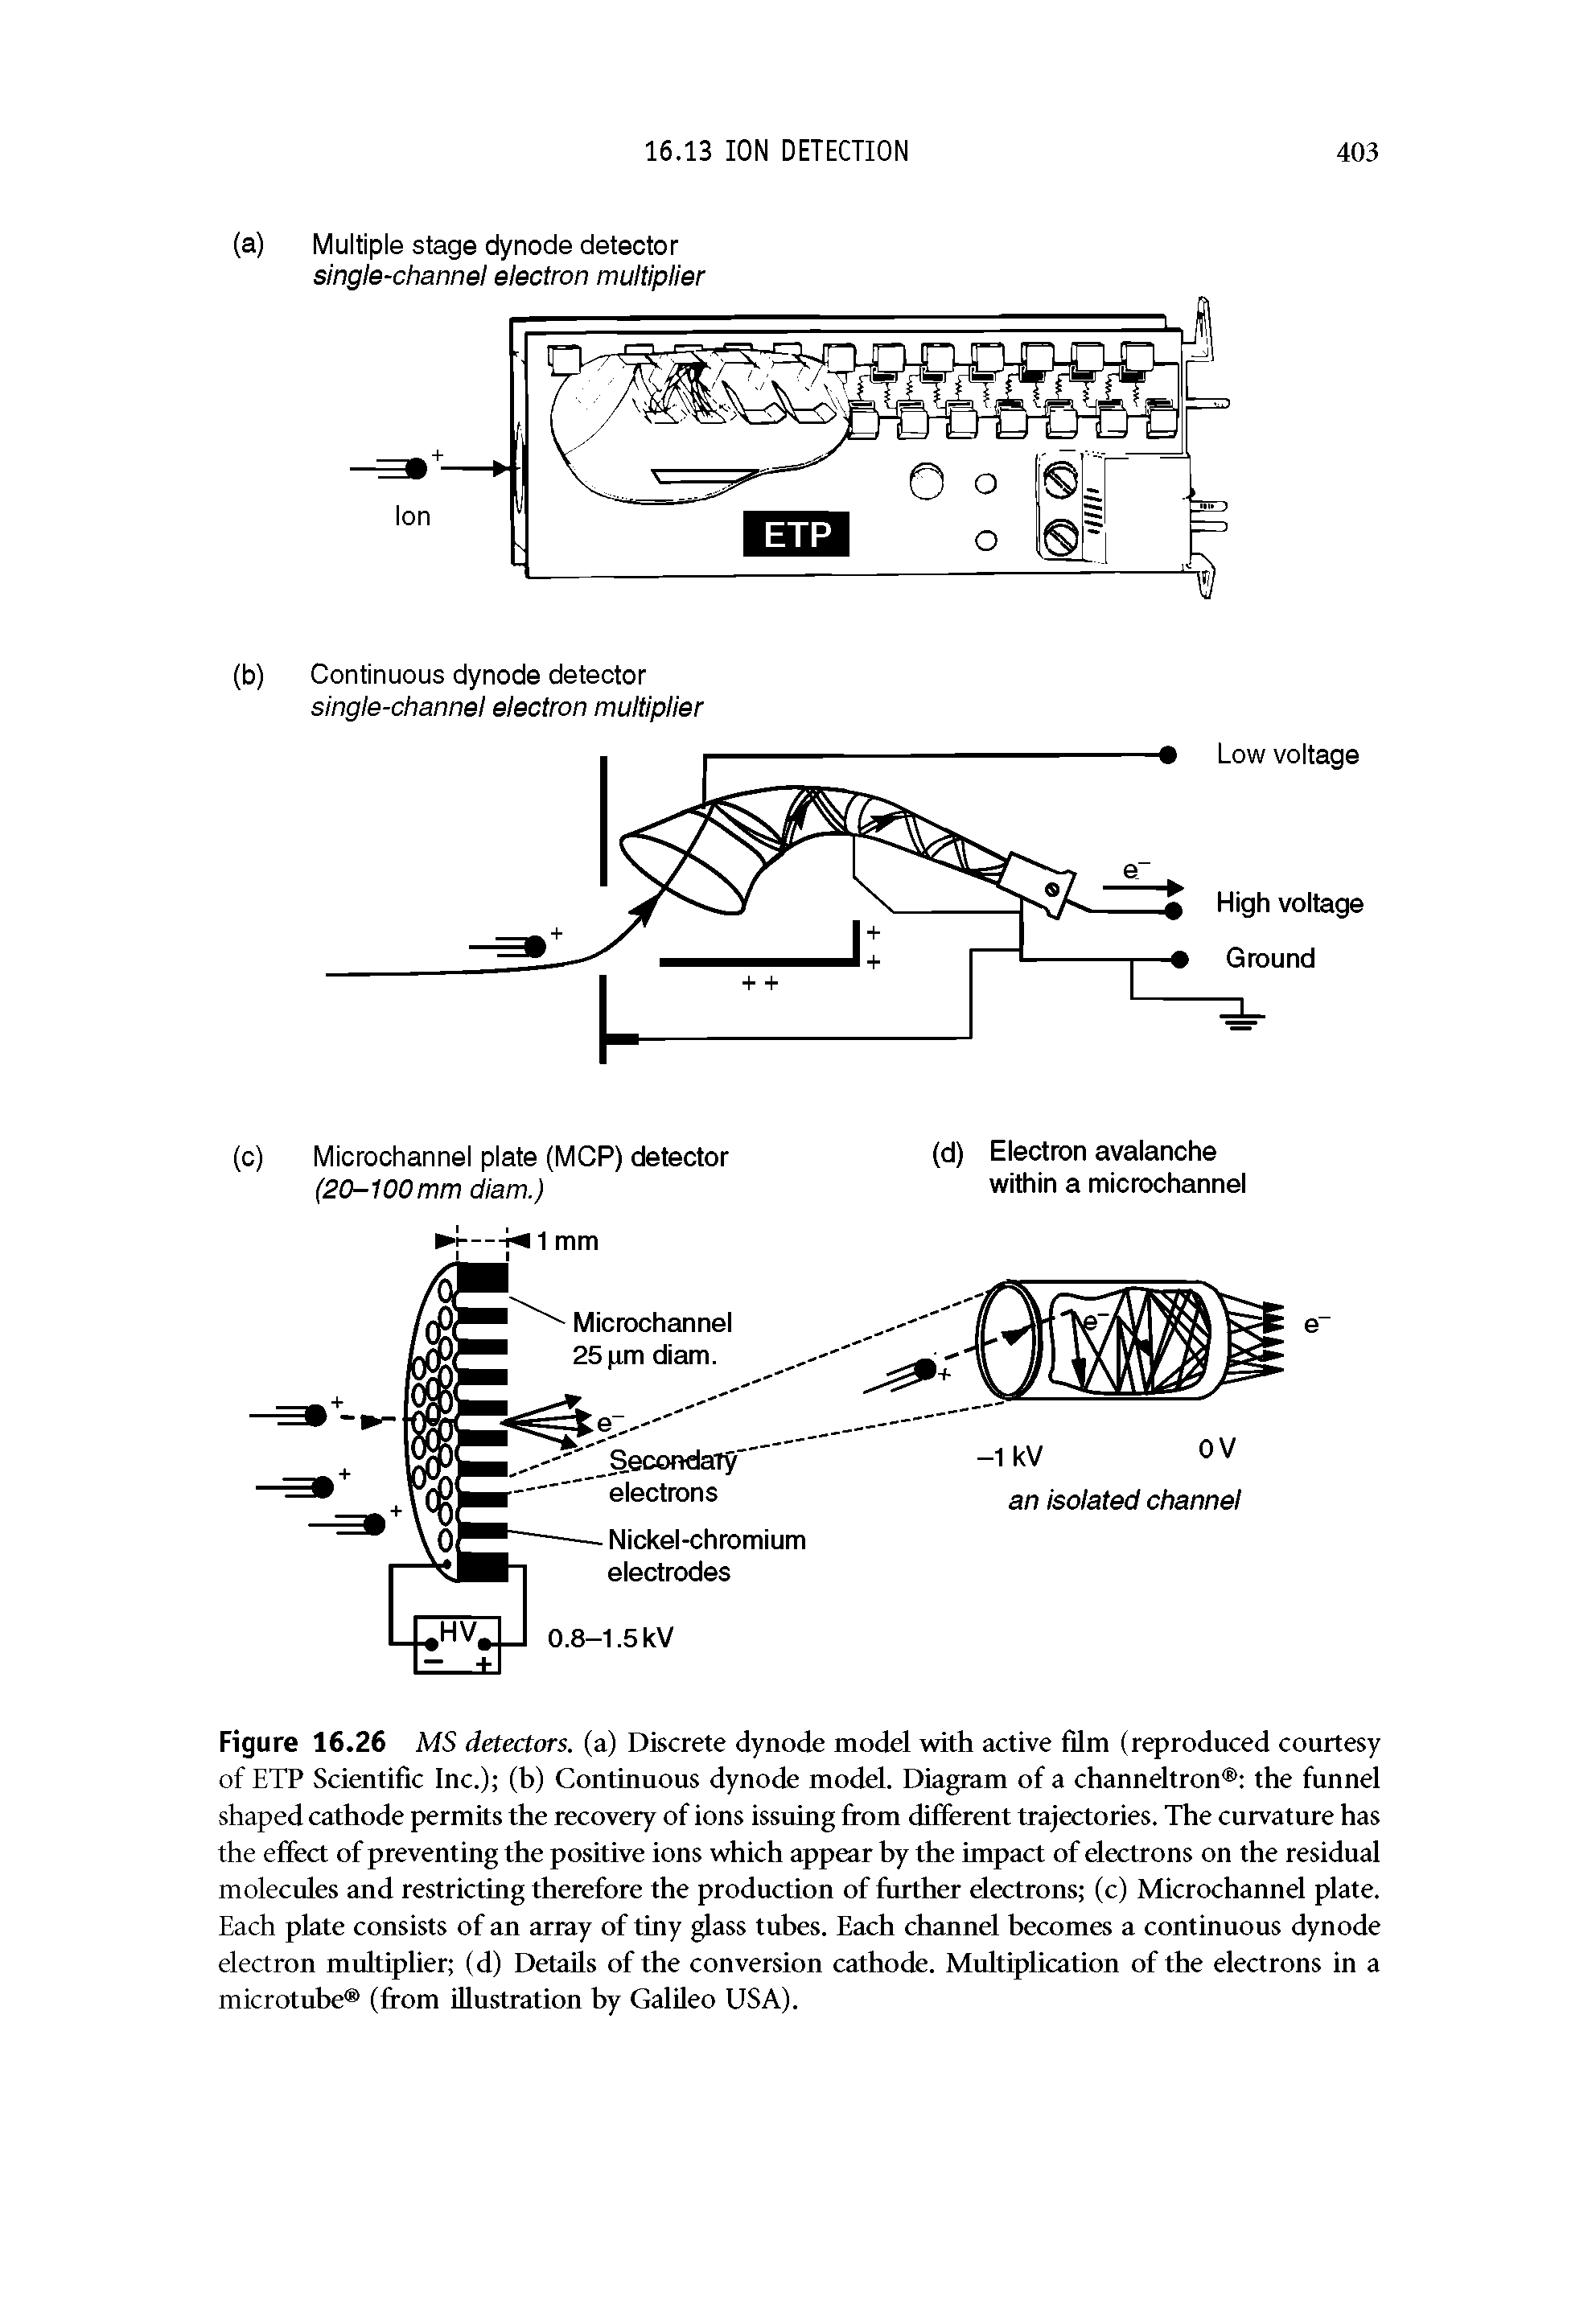 Figure 16.26 MS detectors, (a) Discrete dynode model with active film (reproduced courtesy of ETP Scientific Inc.) (b) Continuous dynode model. Diagram of a channeltron the funnel shaped cathode permits the recovery of ions issuing from different trajectories. The curvature has the effect of preventing the positive ions which appear by the impact of electrons on the residual molecules and restricting therefore the production of further electrons (c) MicroChannel plate. Each plate consists of an array of tiny glass tubes. Each channel becomes a continuous dynode electron multiplier (d) Details of the conversion cathode. Multiplication of the electrons in a microtube (from illustration by Galileo USA).